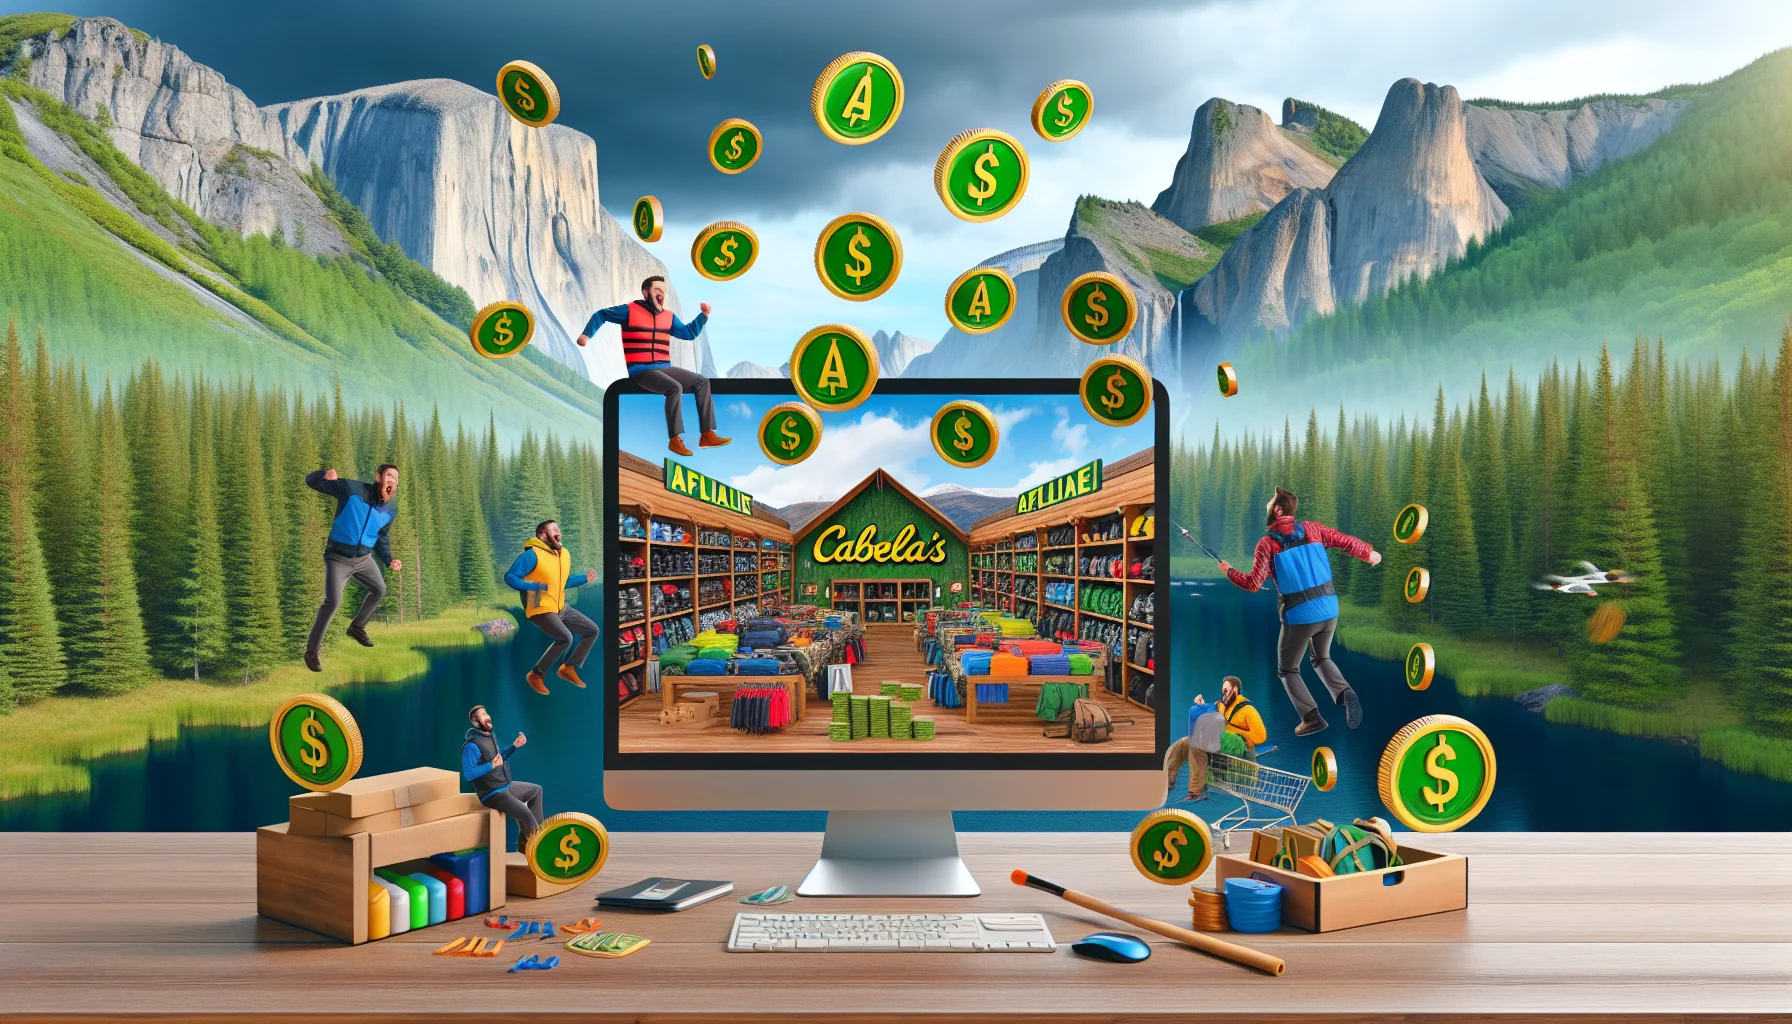 An engaging and humorous scene encapsulating the Cabela's affiliate program. Imagine a virtual marketplace filled with Cabela's outdoor products amid a backdrop of lush forests and pristine mountains. Affiliates excitedly showing off their digital commissions in the form of vibrant coins dropping from a computer screen onto a desk. The scene should highlight the connection between nature, outdoor activities, e-commerce, and earning possibilities online.